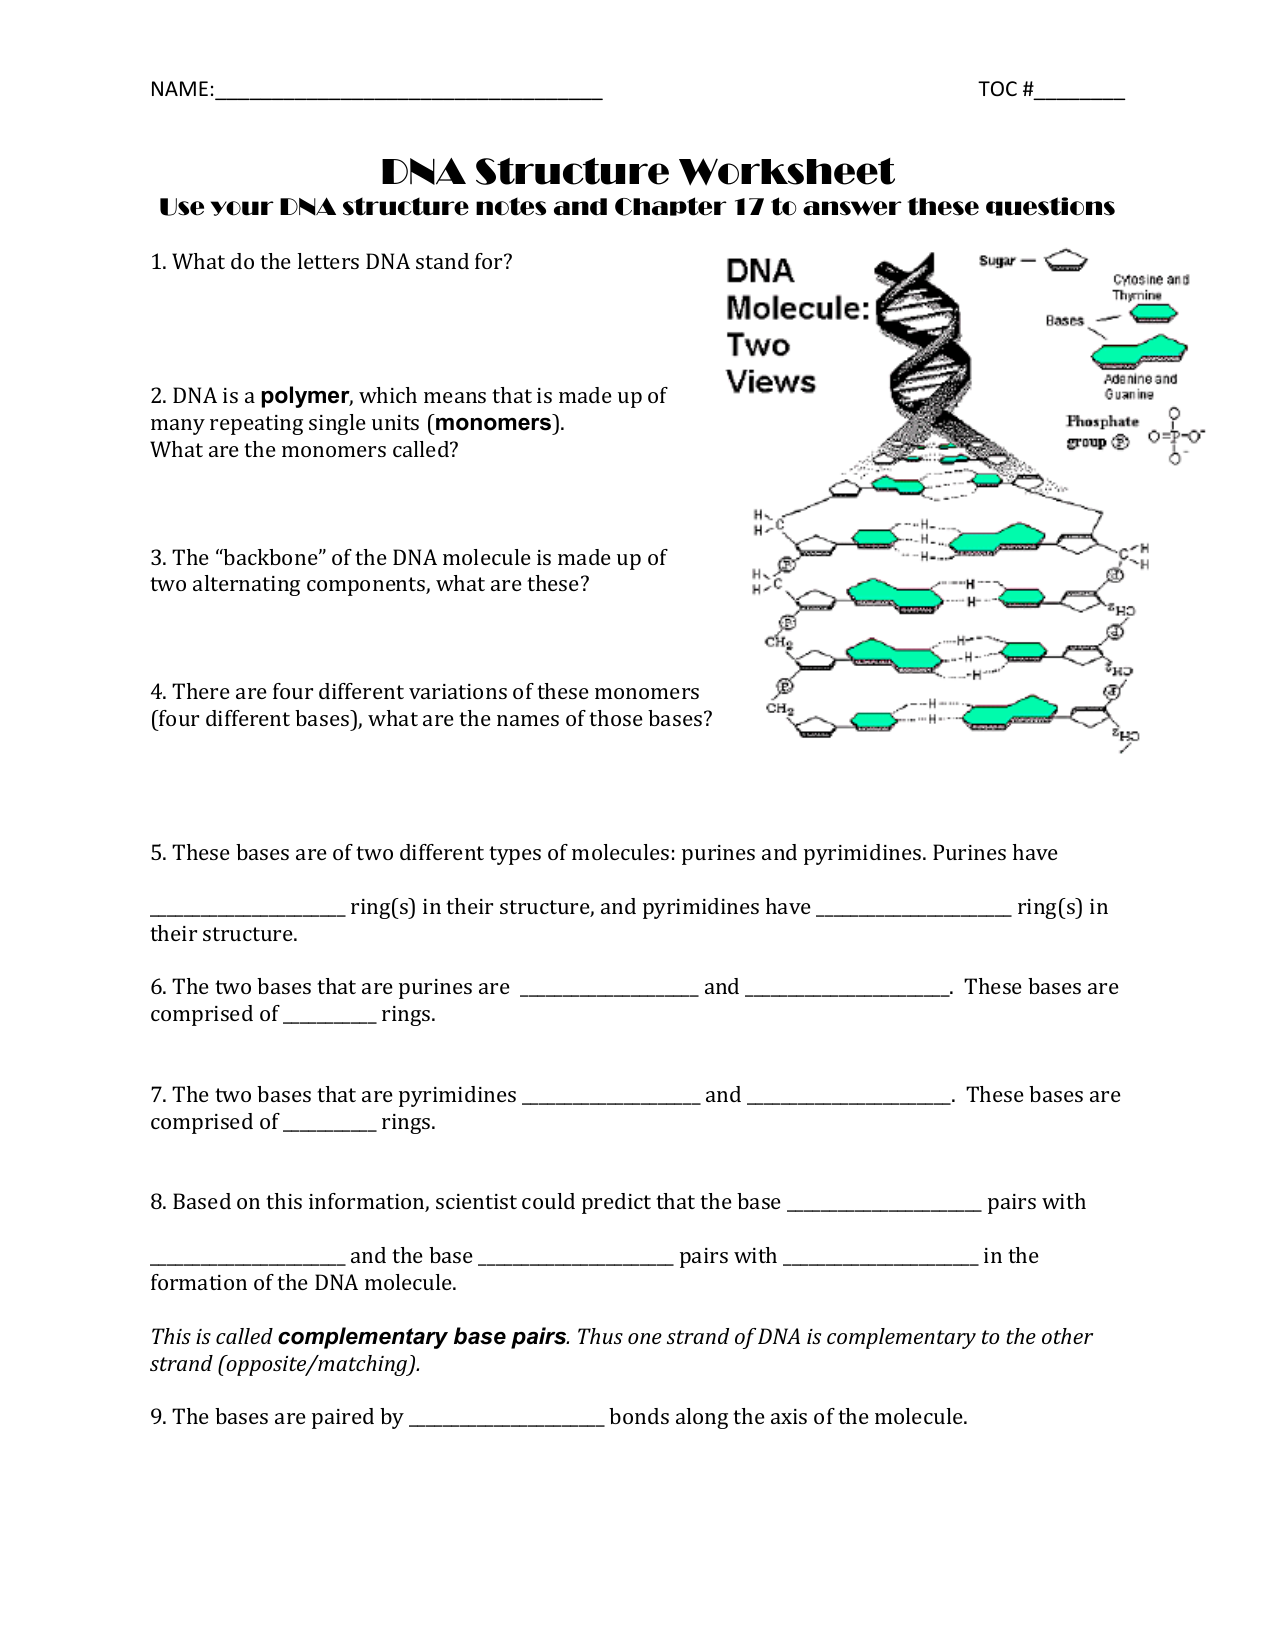 DIAGRAM] Introduction To Genetics Vocabulary Review Labeling Intended For Dna Replication Worksheet Answer Key